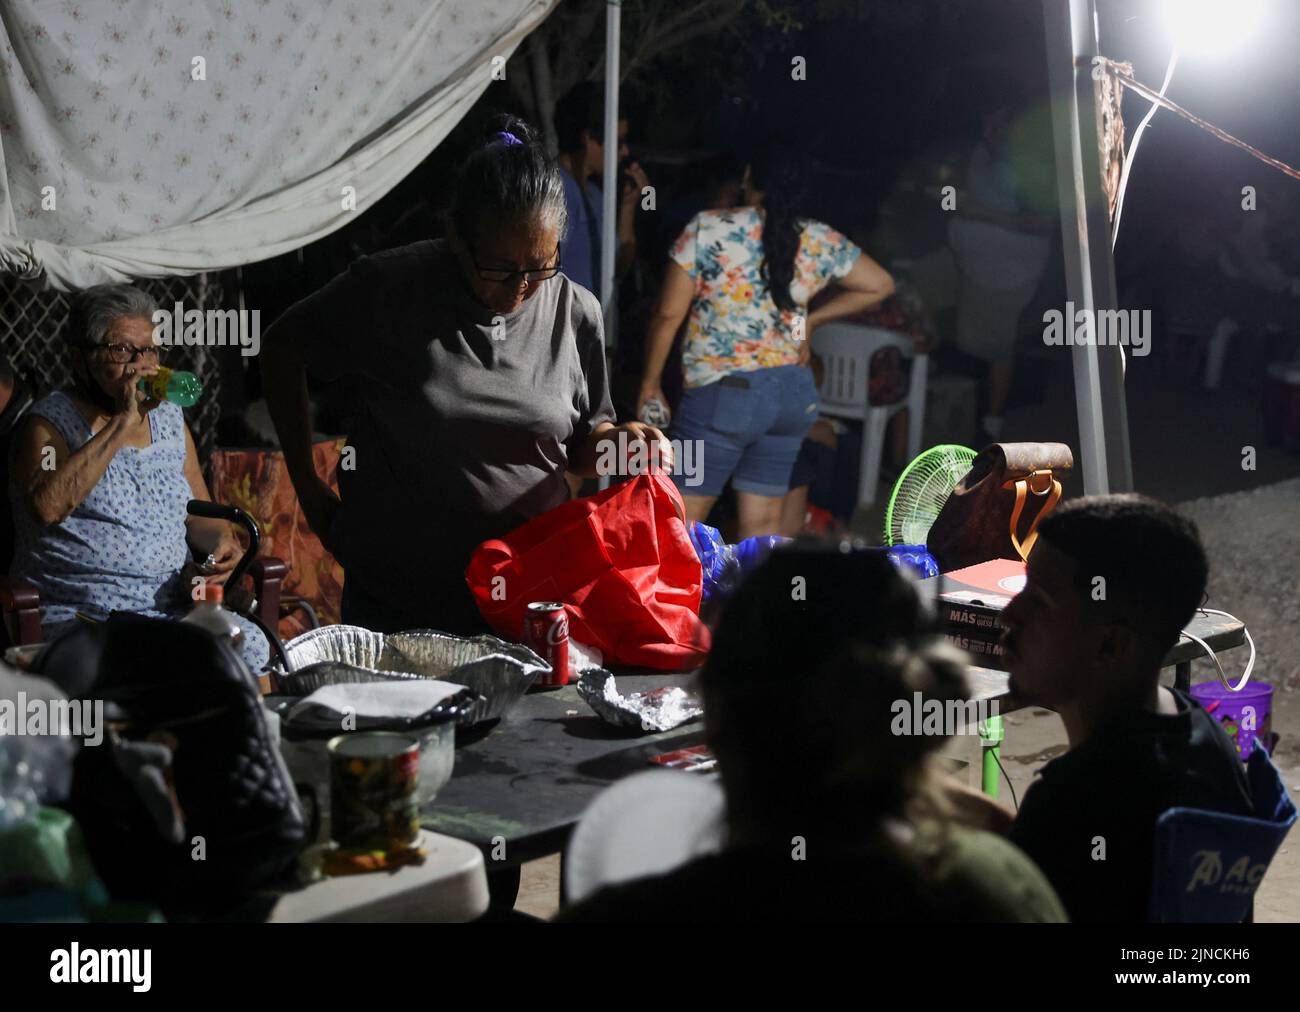 Relatives of miners have dinner and wait for news about their loved ones outside the facilities of a coal mine where a mine shaft collapsed leaving miners trapped, in Sabinas, Coahuila state, Mexico, August 10, 2022. REUTERS/Luis Cortes Stock Photo